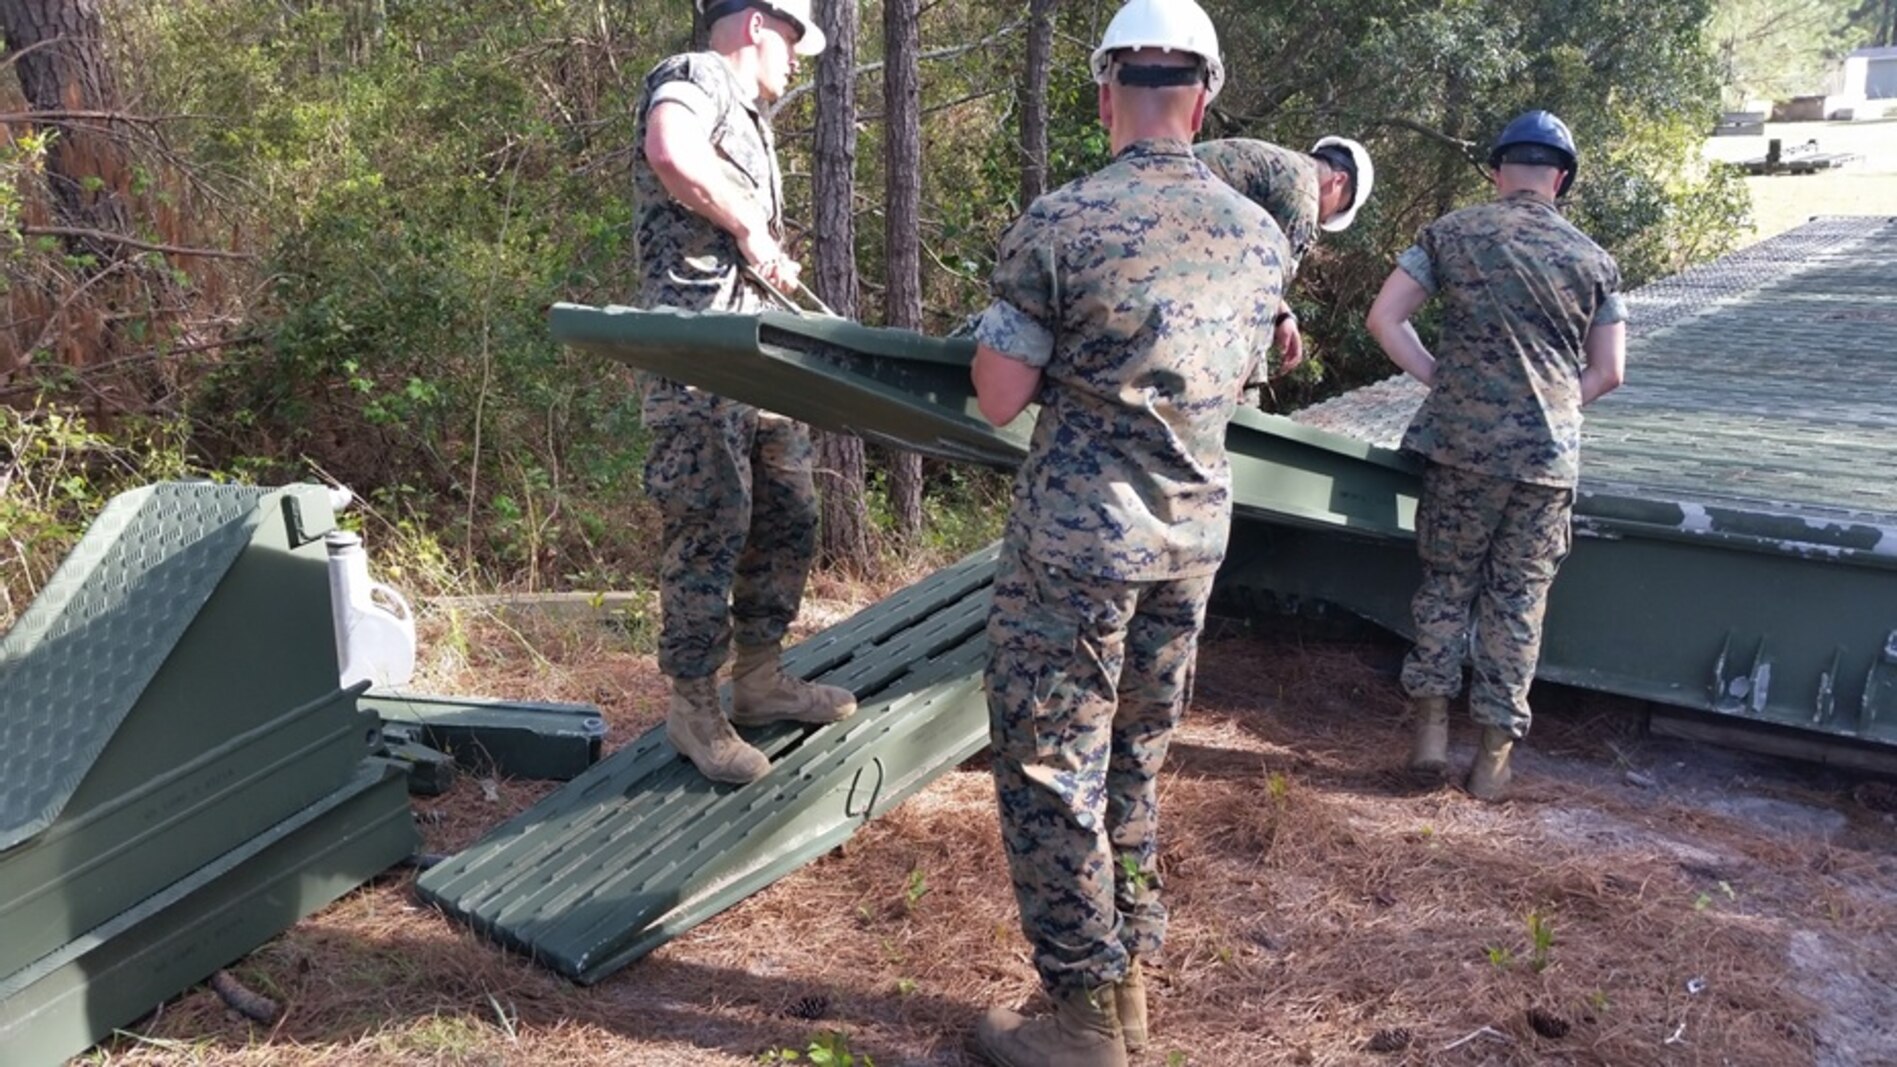 On April 10, 2017, Marines attached to Combat Engineer Officer course 3-17 (CEO 3-17) emplace ramp units on a single story medium girder bridge. During their period of instruction, CEO students learn to employ single story, double story, and double story with link reinforcement system medium girder bridges; in order to plan for troop movement across gaps. Pictured from left to right:  Second Lieutenants Jacob Ridings, Shawn Balent, Reynaldo Gutierrez, and Joshua Raphaelson.
